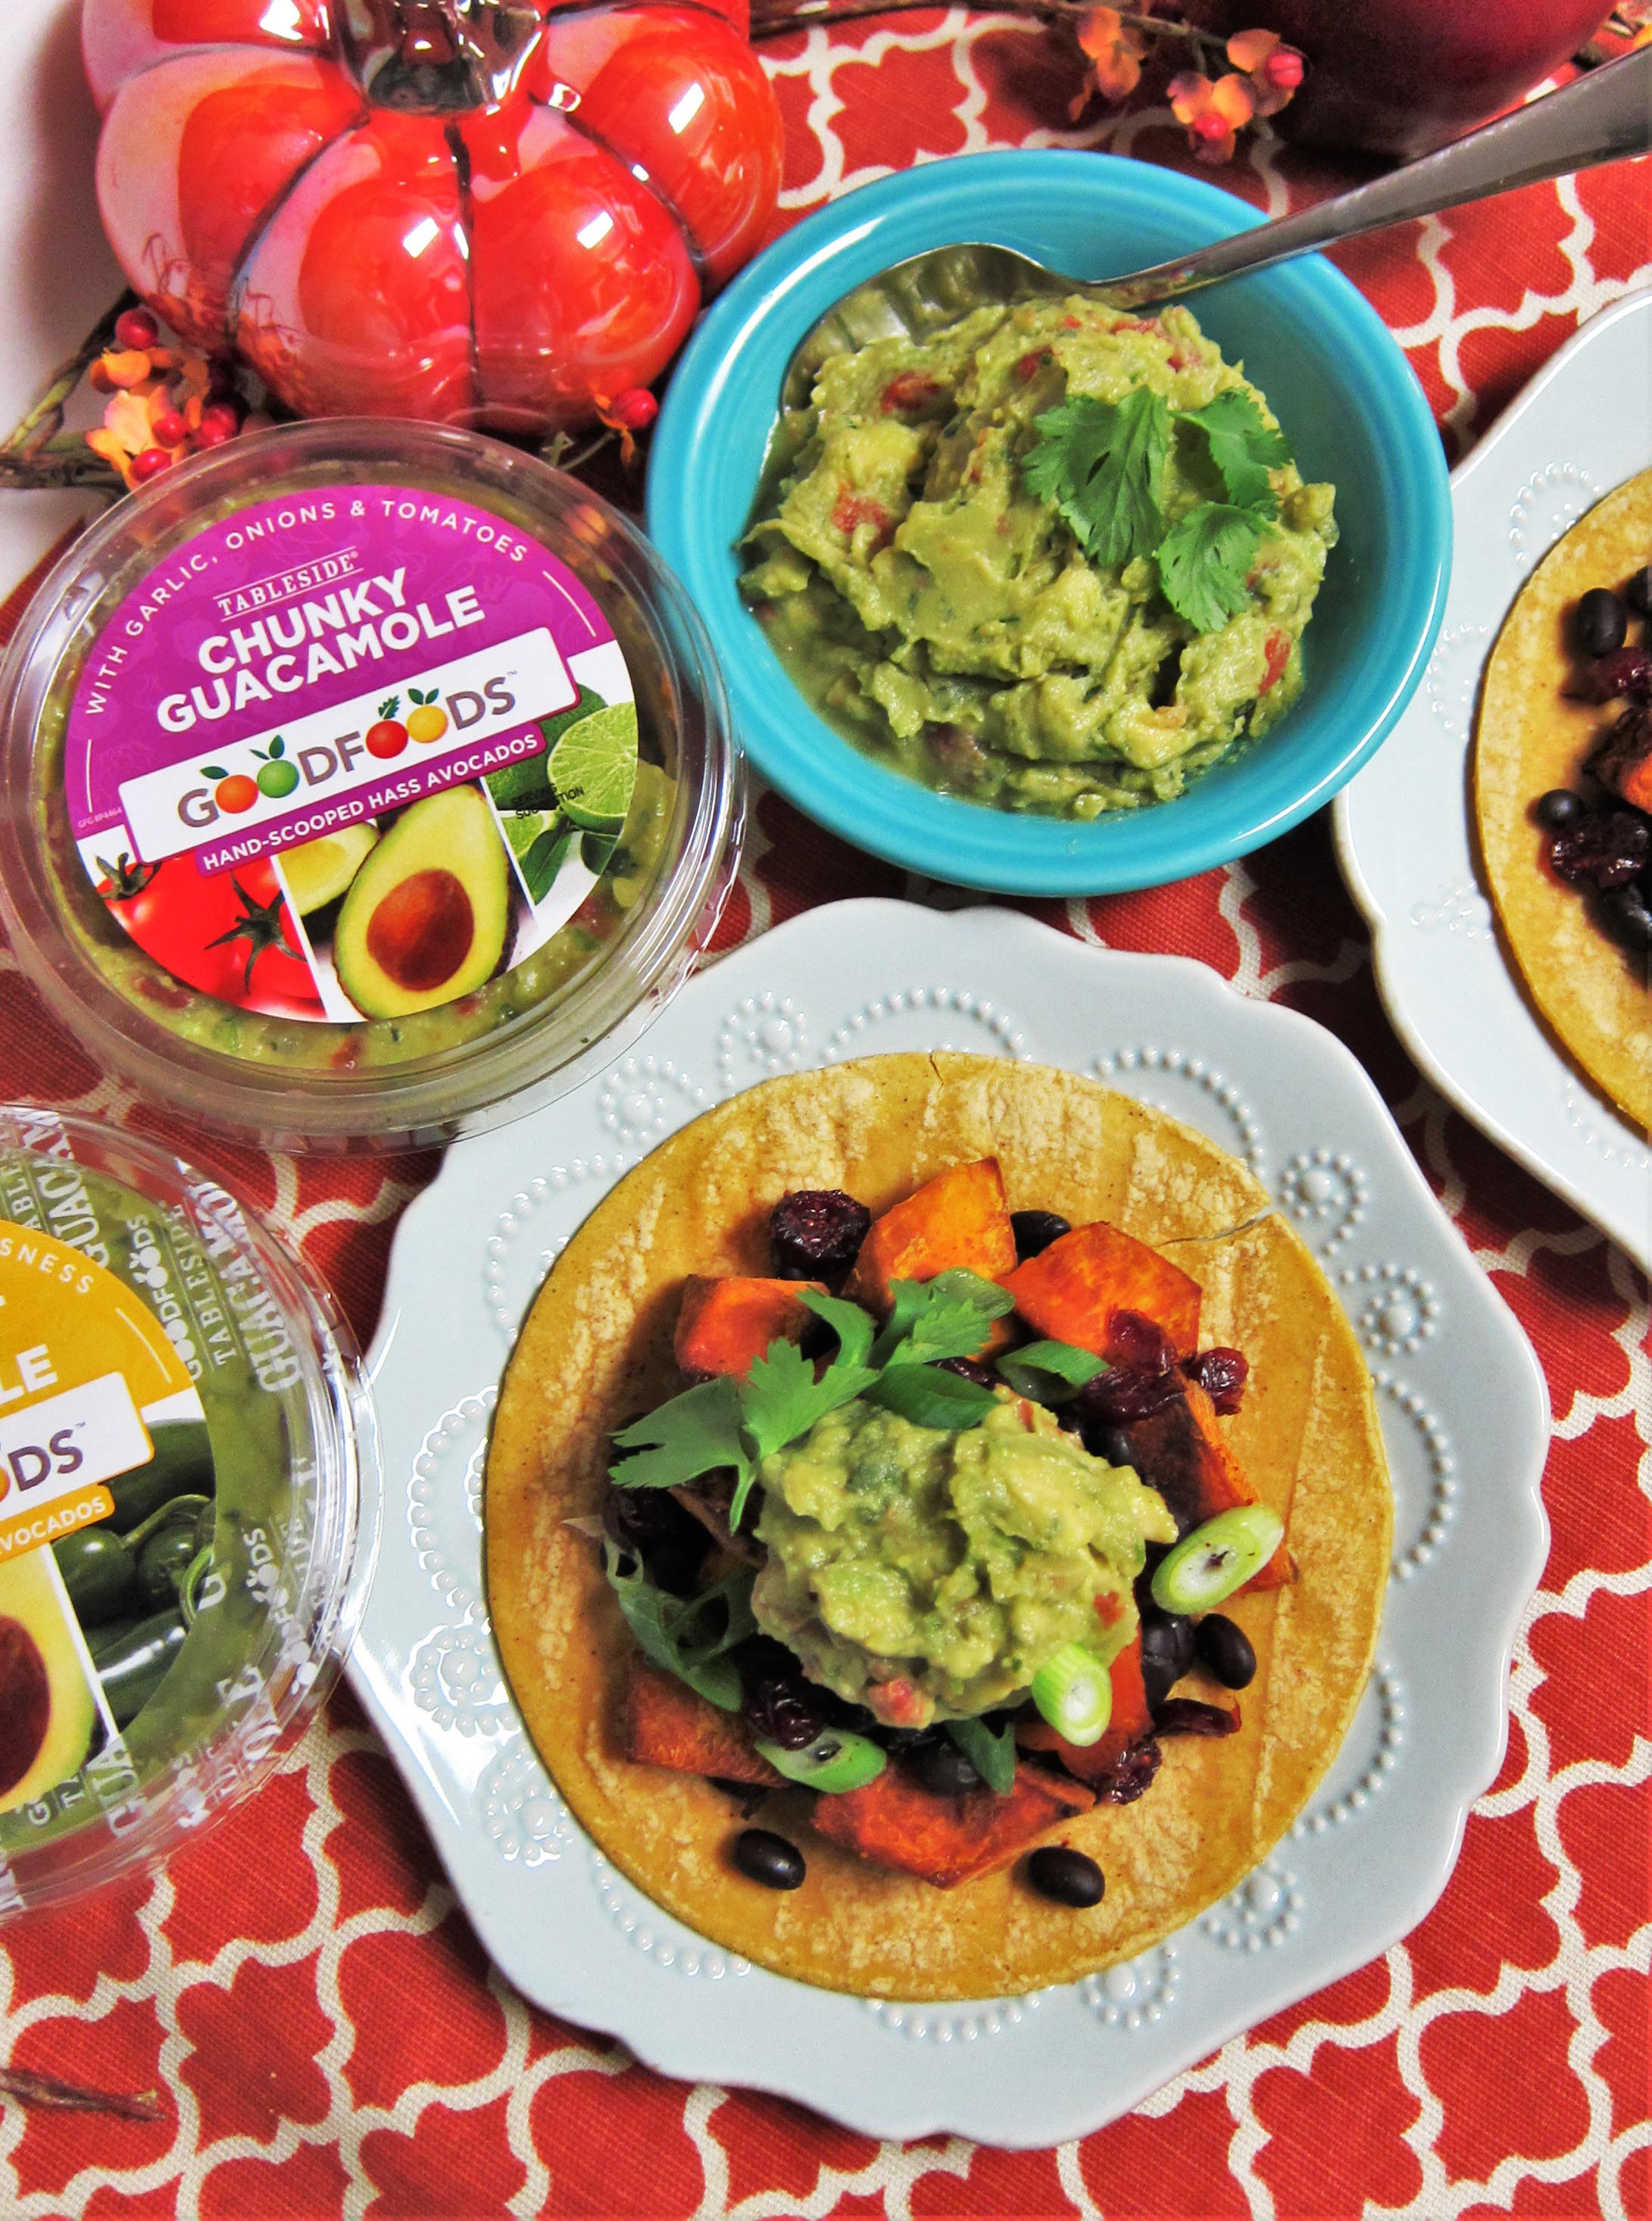 Vegan Roasted Squash Black Bean Tacos Recipe with GOODFOODS Guacamole